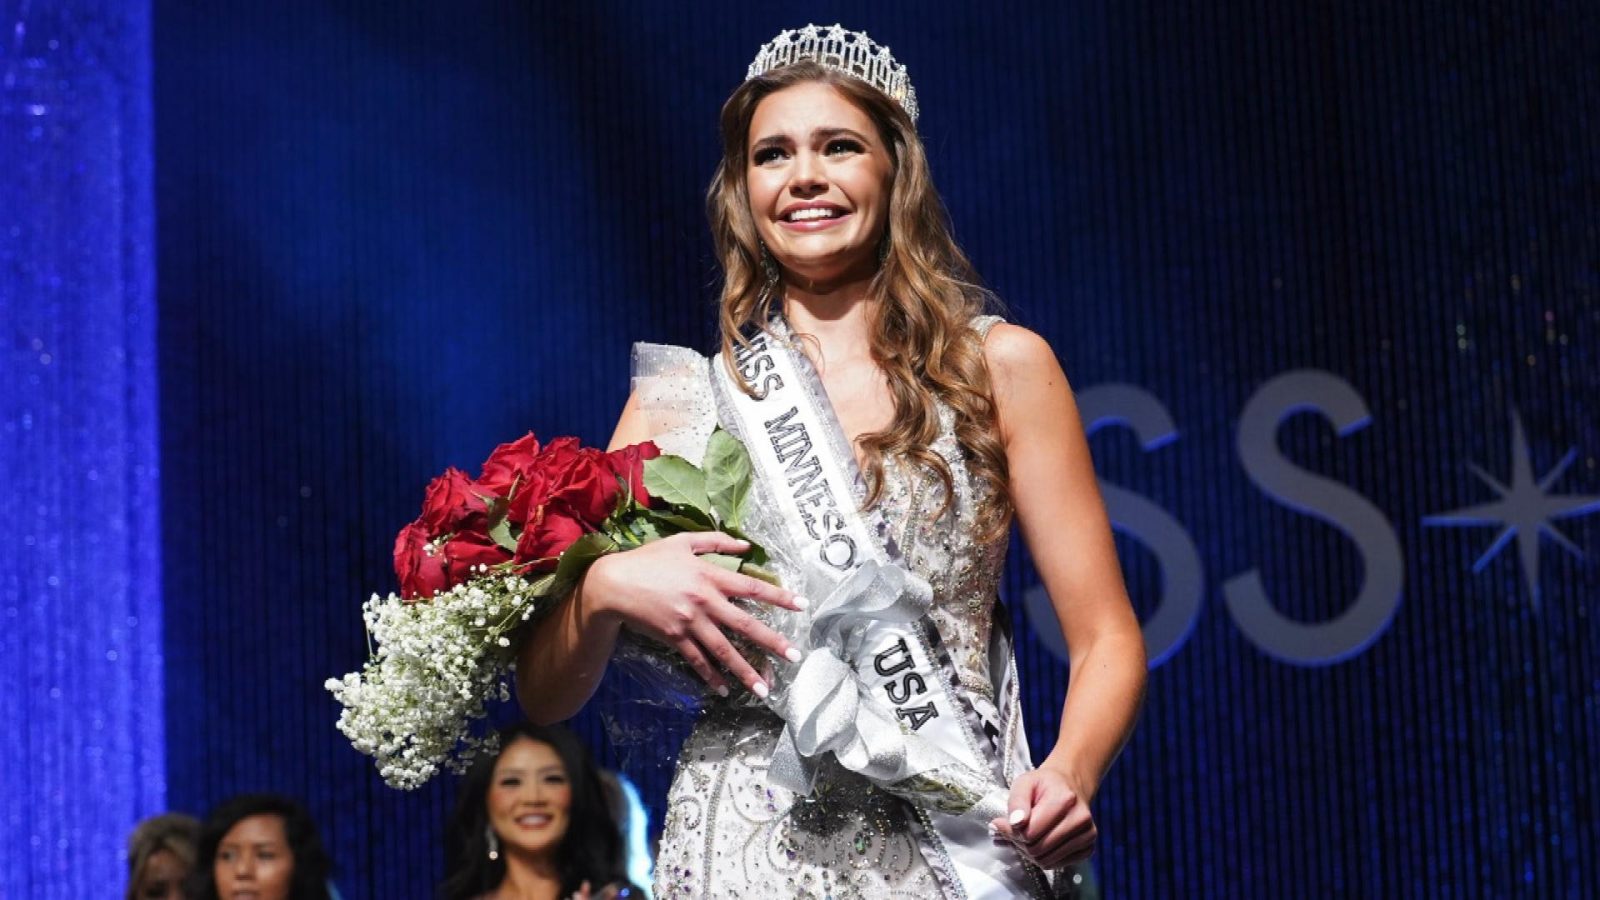 Miss Minnesota USA Sarah Anderson, of Maple Grove, Readies for National